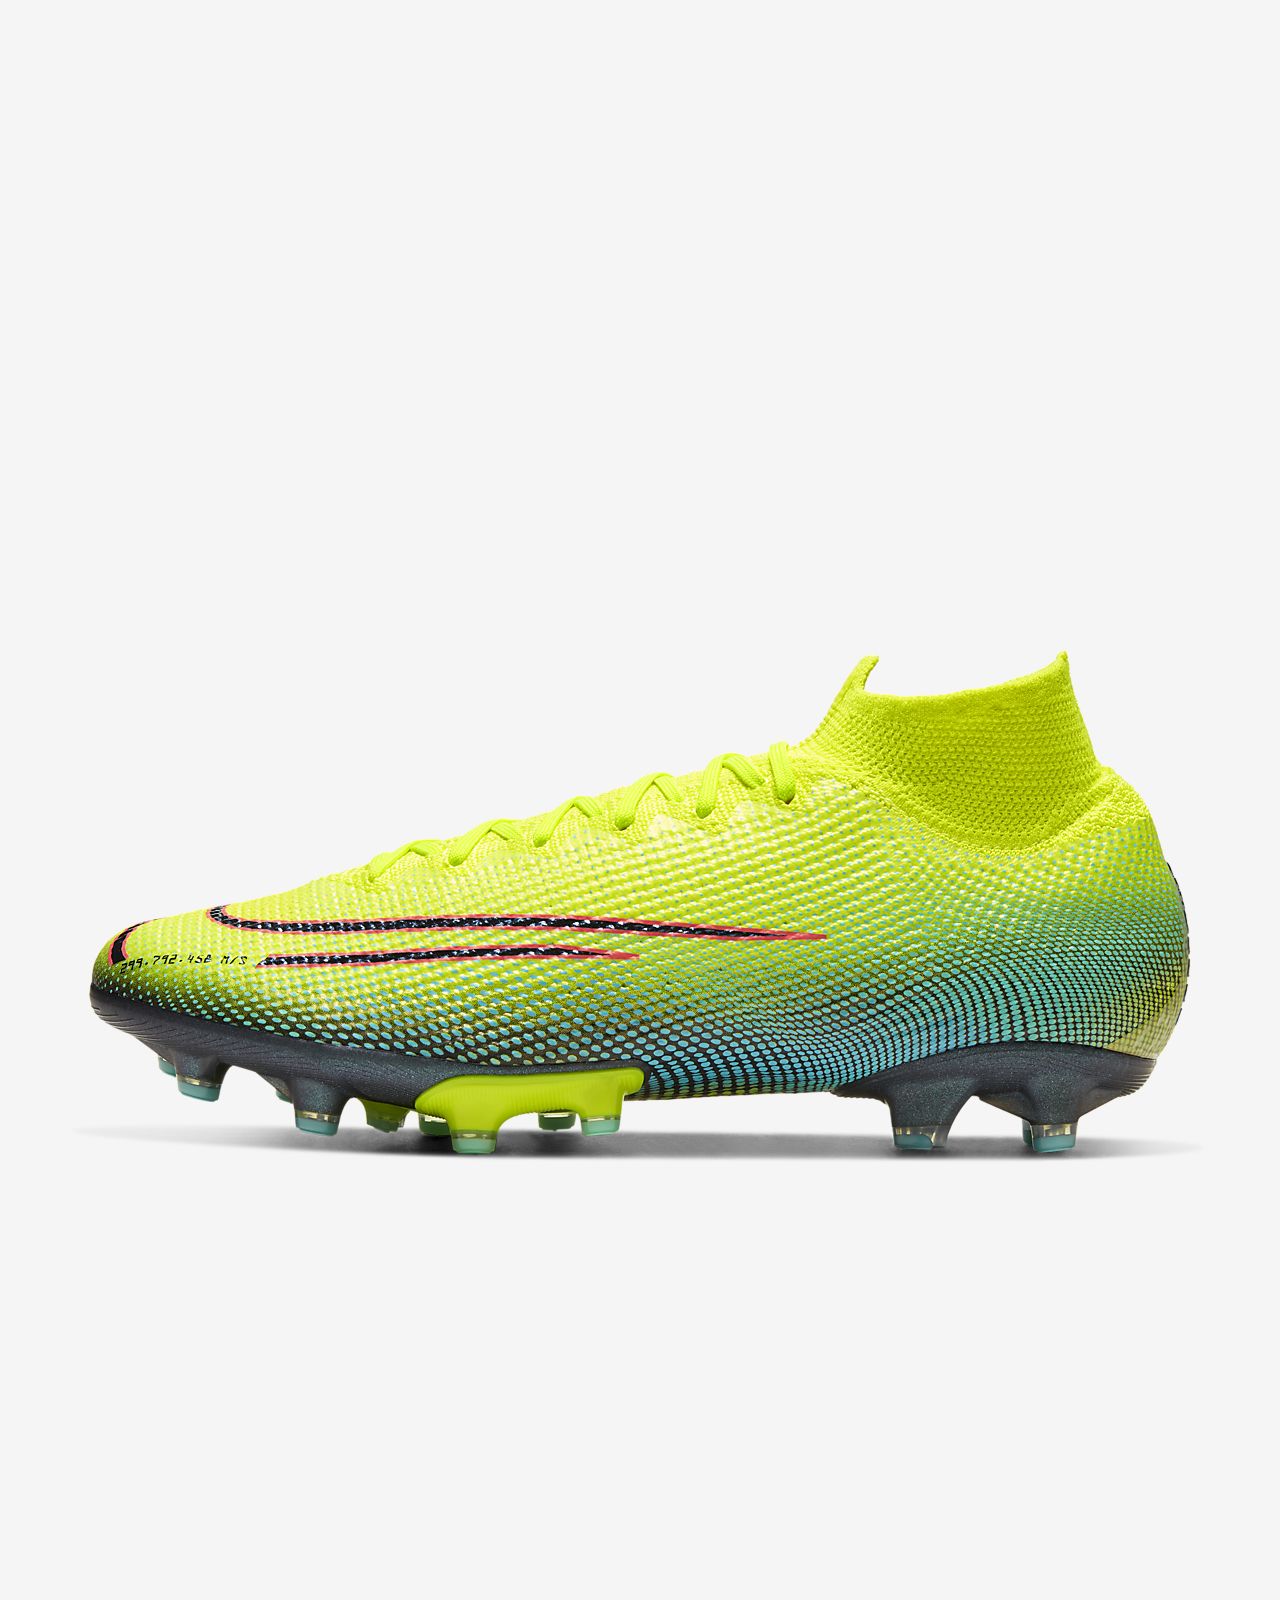 Nike Mercurial Superfly 6 Elite AC SG Pro LVL UP Cleats